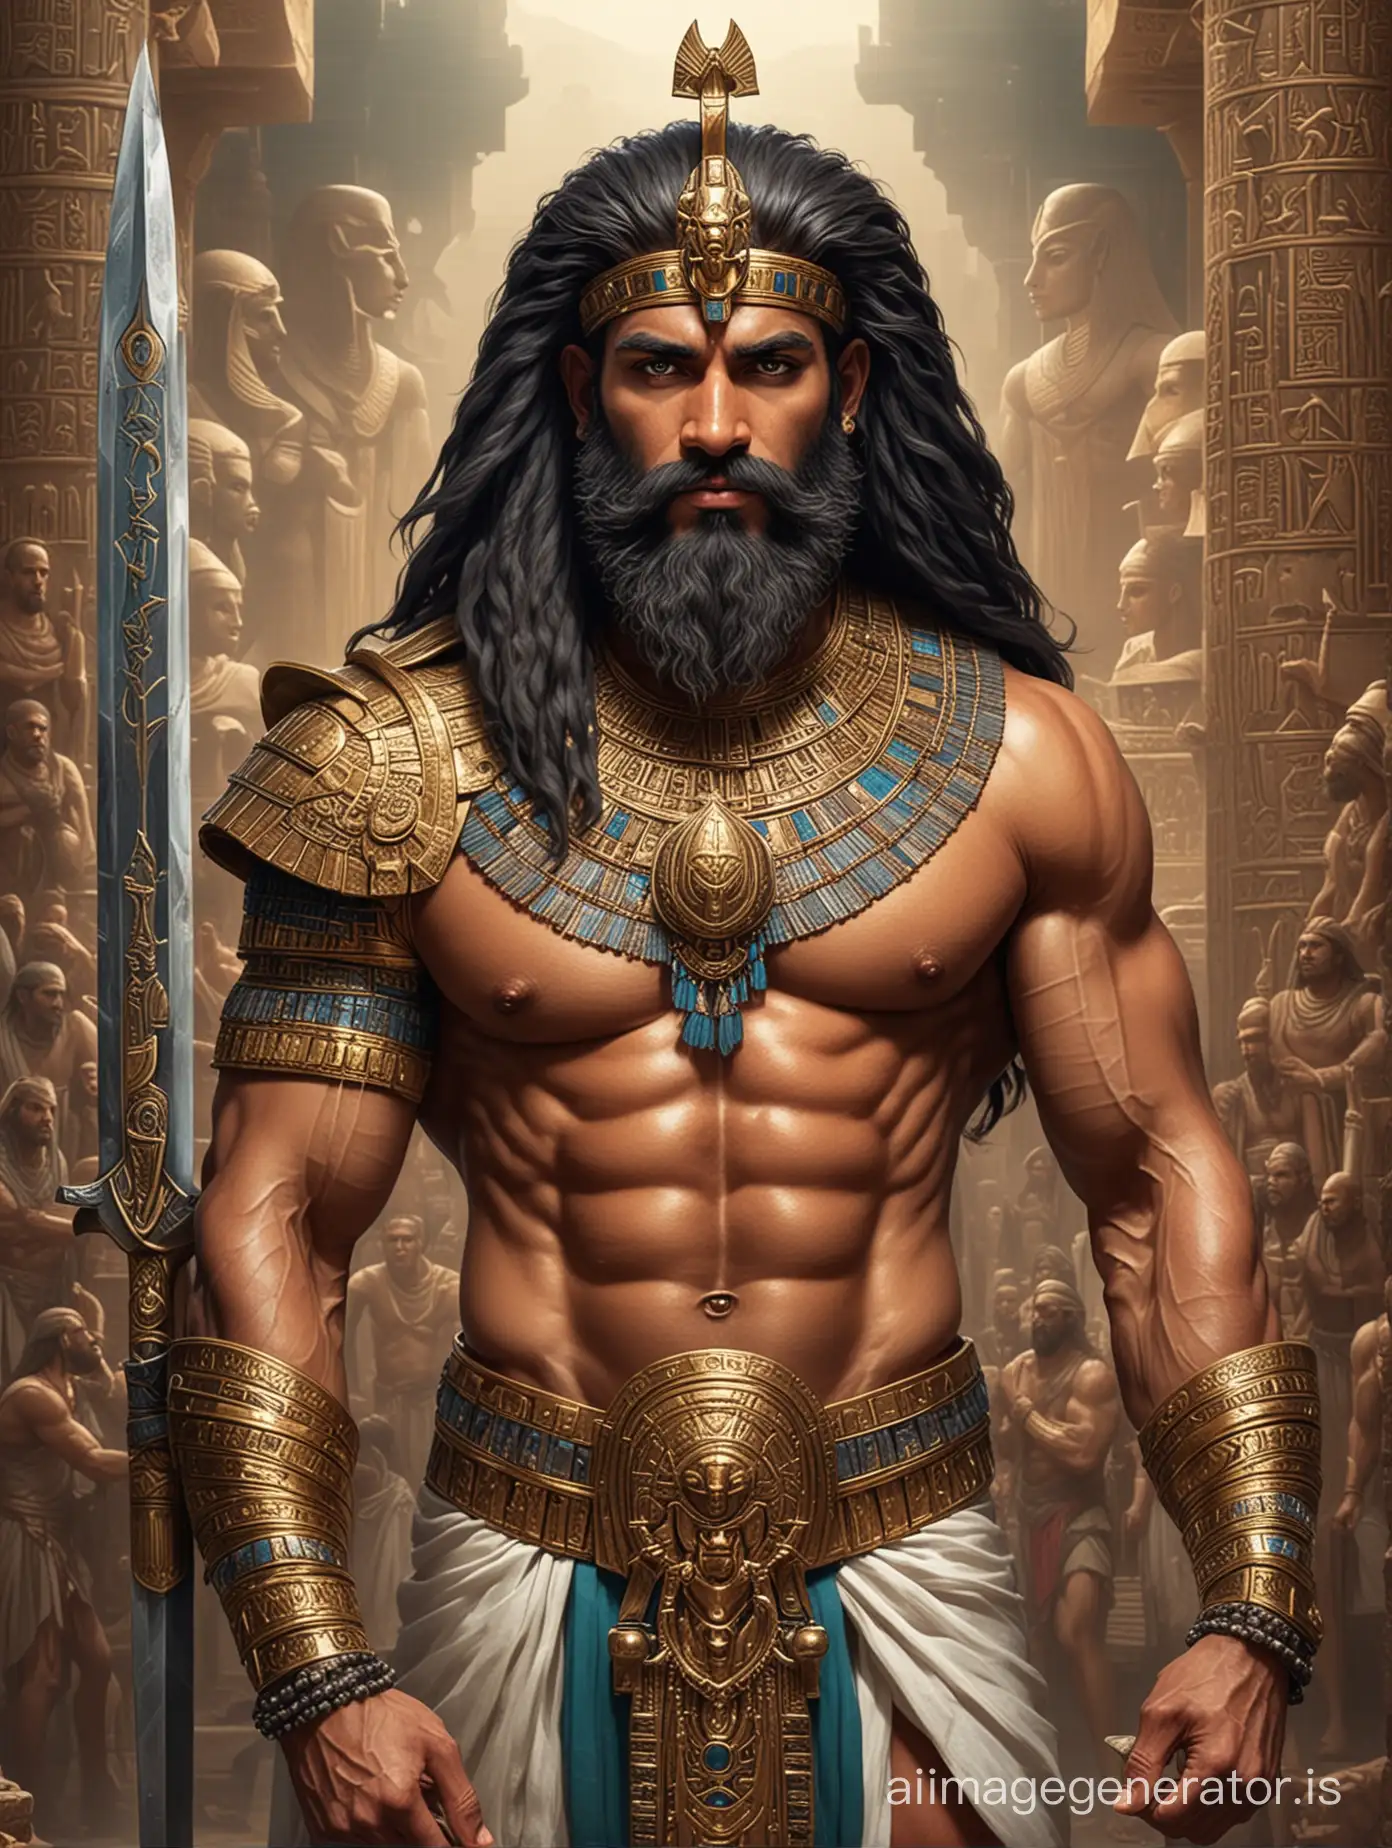 Ancient Egyptian human king with ancient Egyptian jewellery who is a bodybuilder with huge beard and holding just one ancient beautiful sword  and a temple background with a huge lined up army